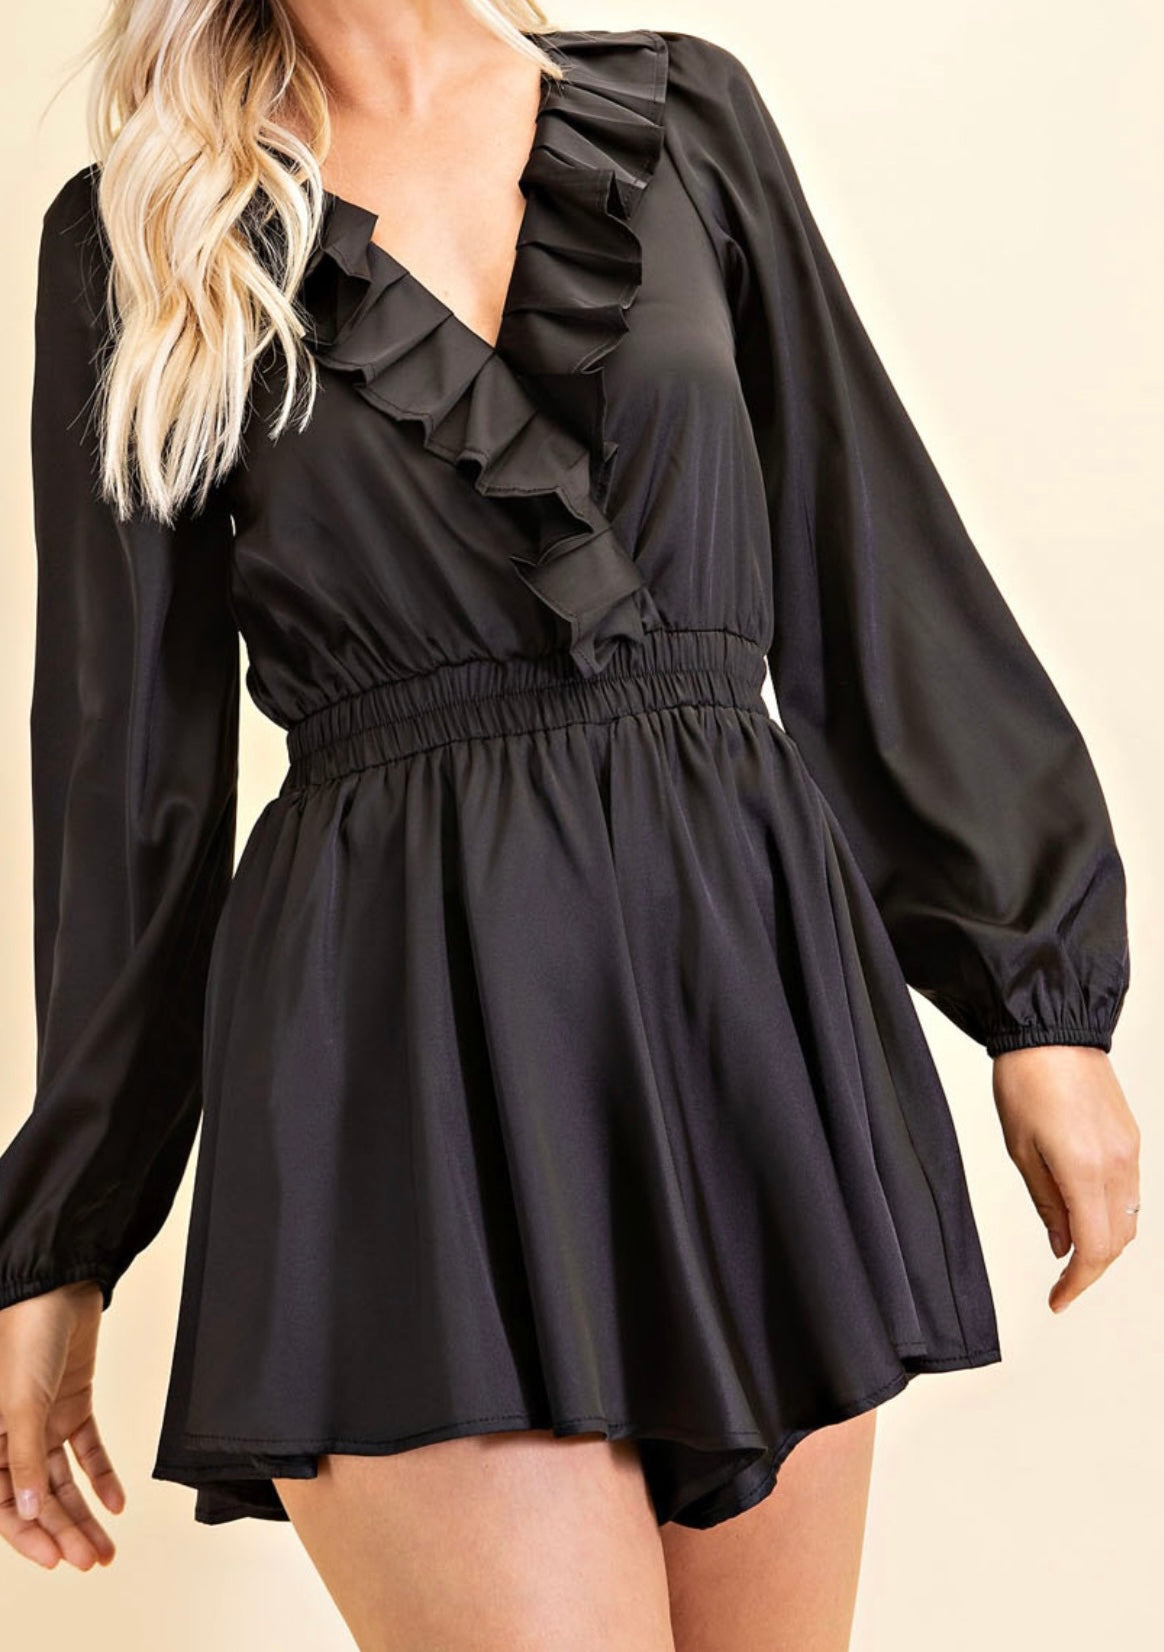 Hit ‘Em Up Style Pleated Romper